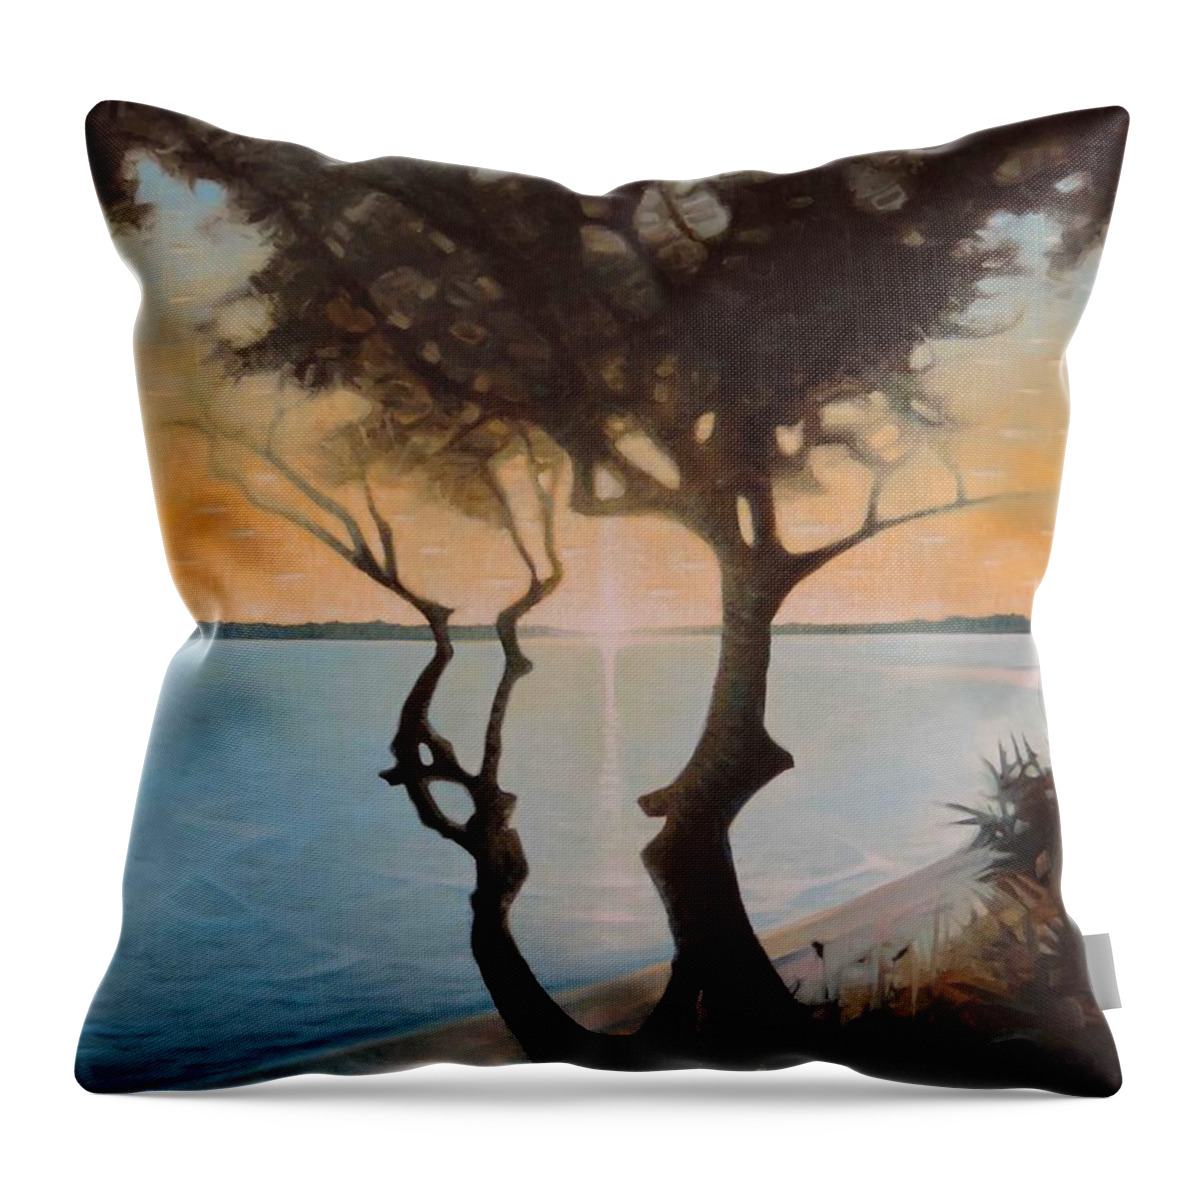 Oil Painting Sunset Ocean Sea Sea Cost Coastal Pensacola Florida Seaside Realism Contemporary Throw Pillow featuring the painting Sunset At Navy Point by T S Carson